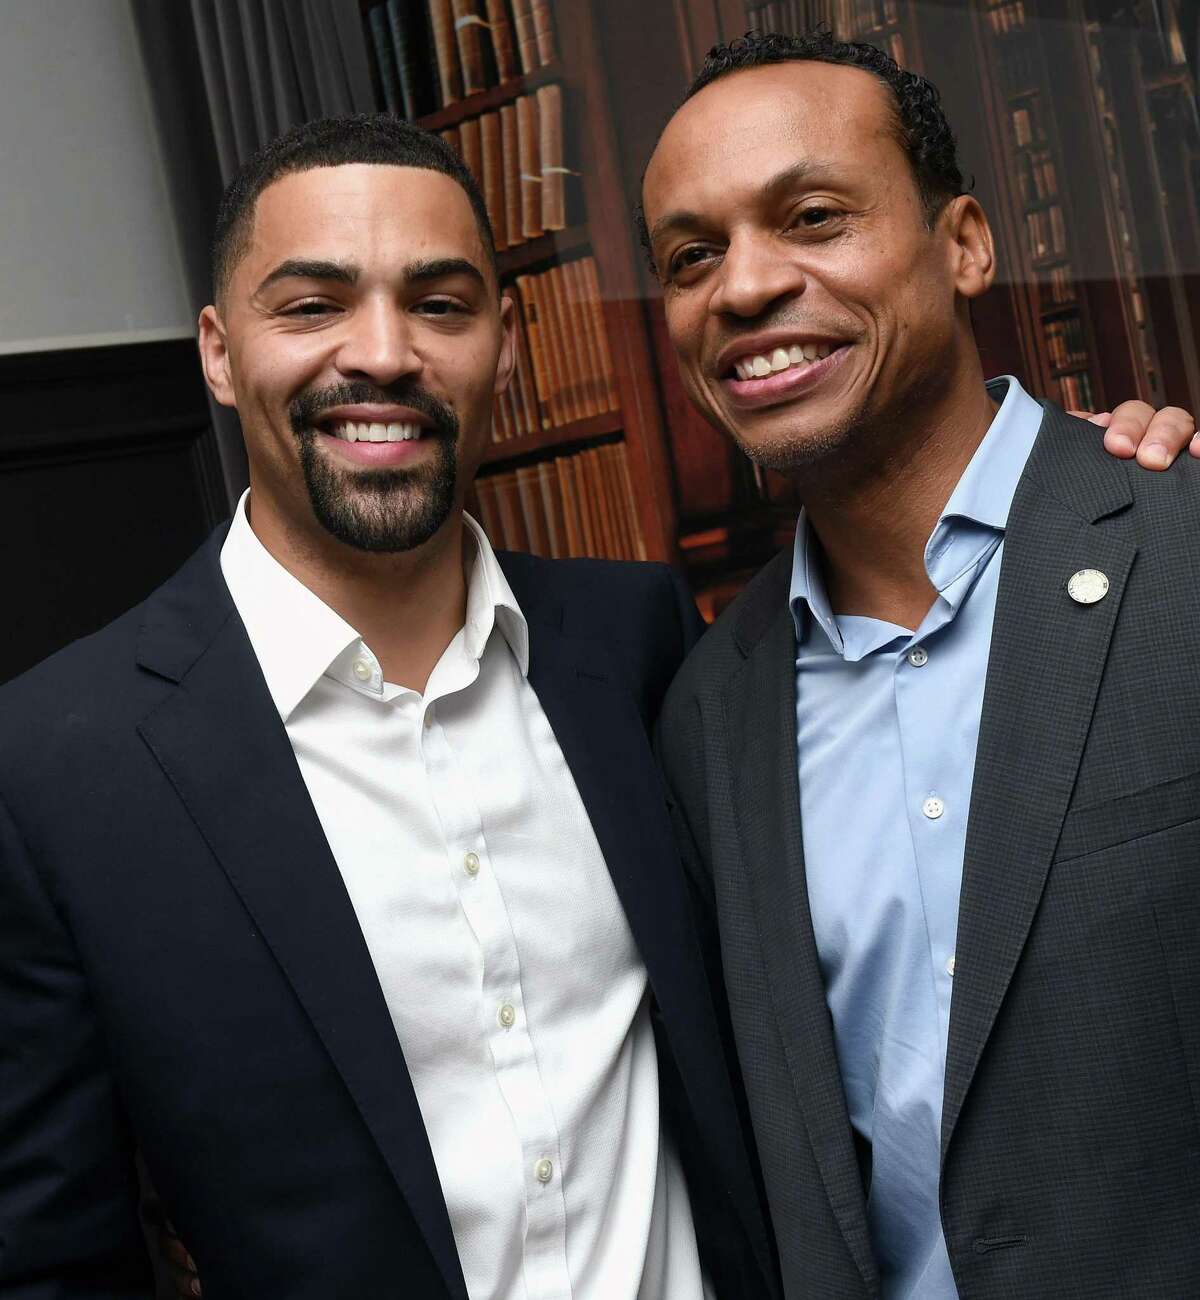 Democratic treasurer candidate Erick Russell, left, celebrates with outgoing treasurer Shawn Wooden at the Trinity Bar in New Haven on August 9, 2022.